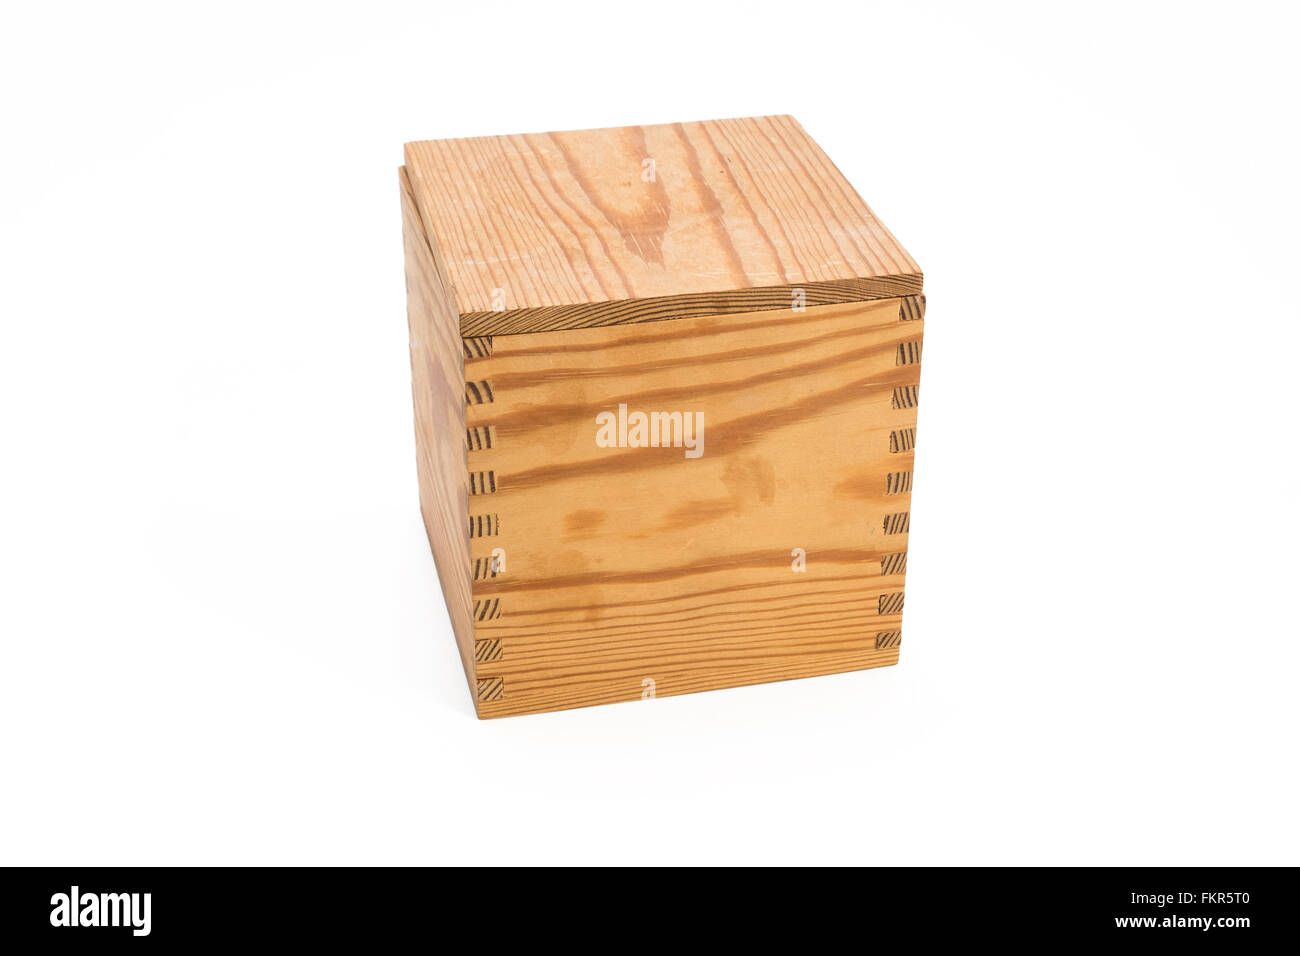 closed wooden box on white background Stock Photo